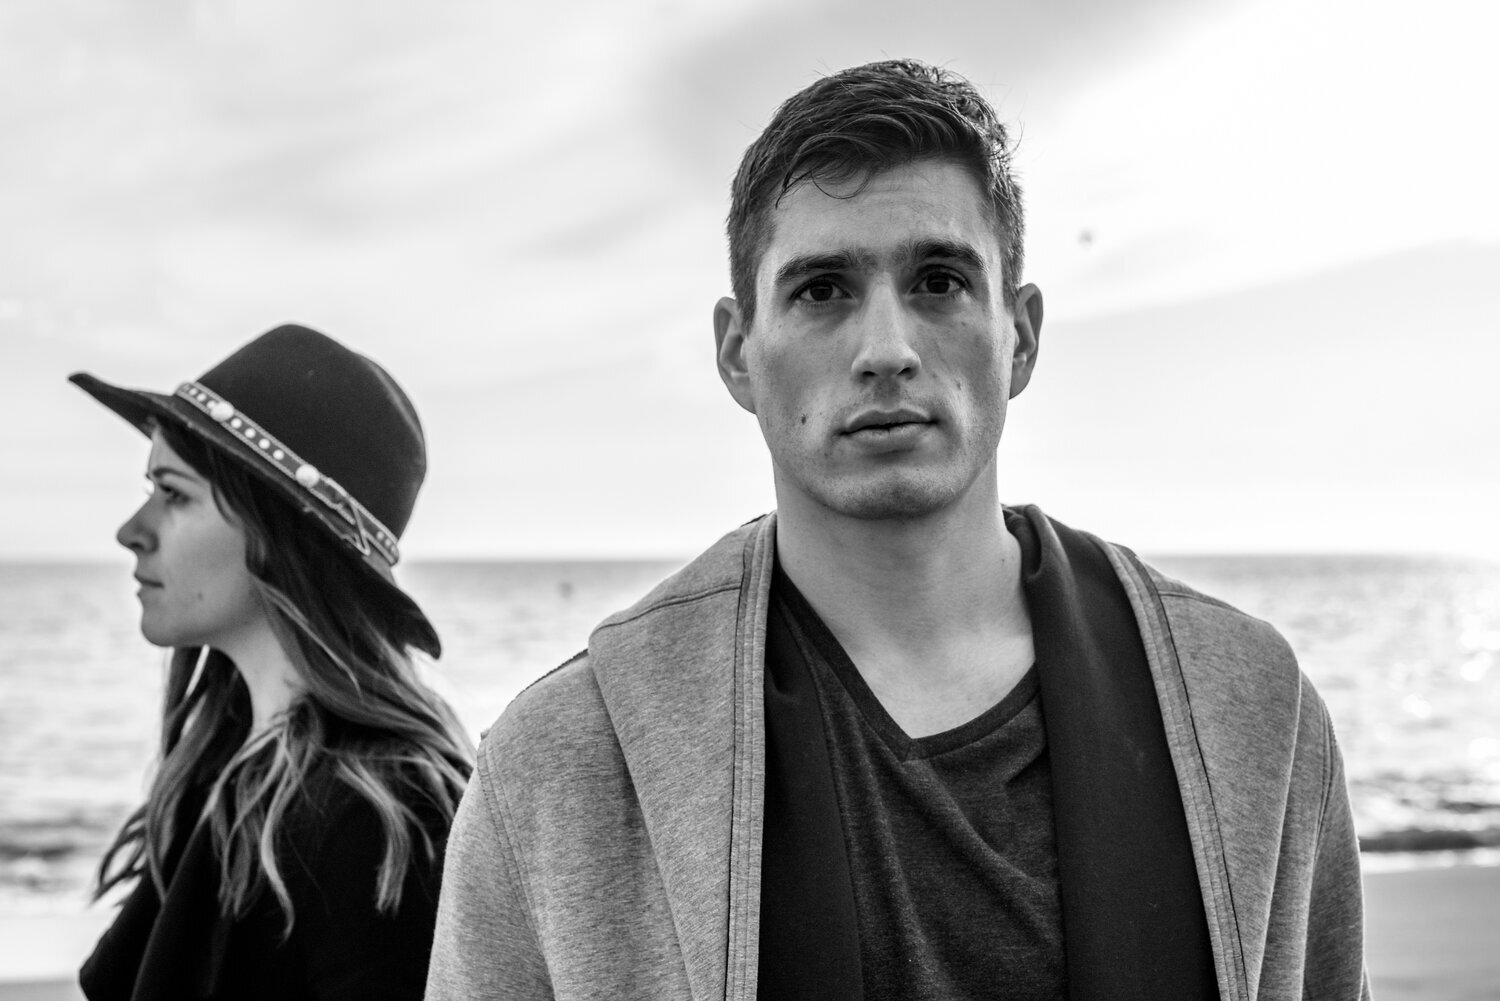 Casey Wickstrom & Taylor Rae Join Forces For Highly-Anticipated Single "Post"